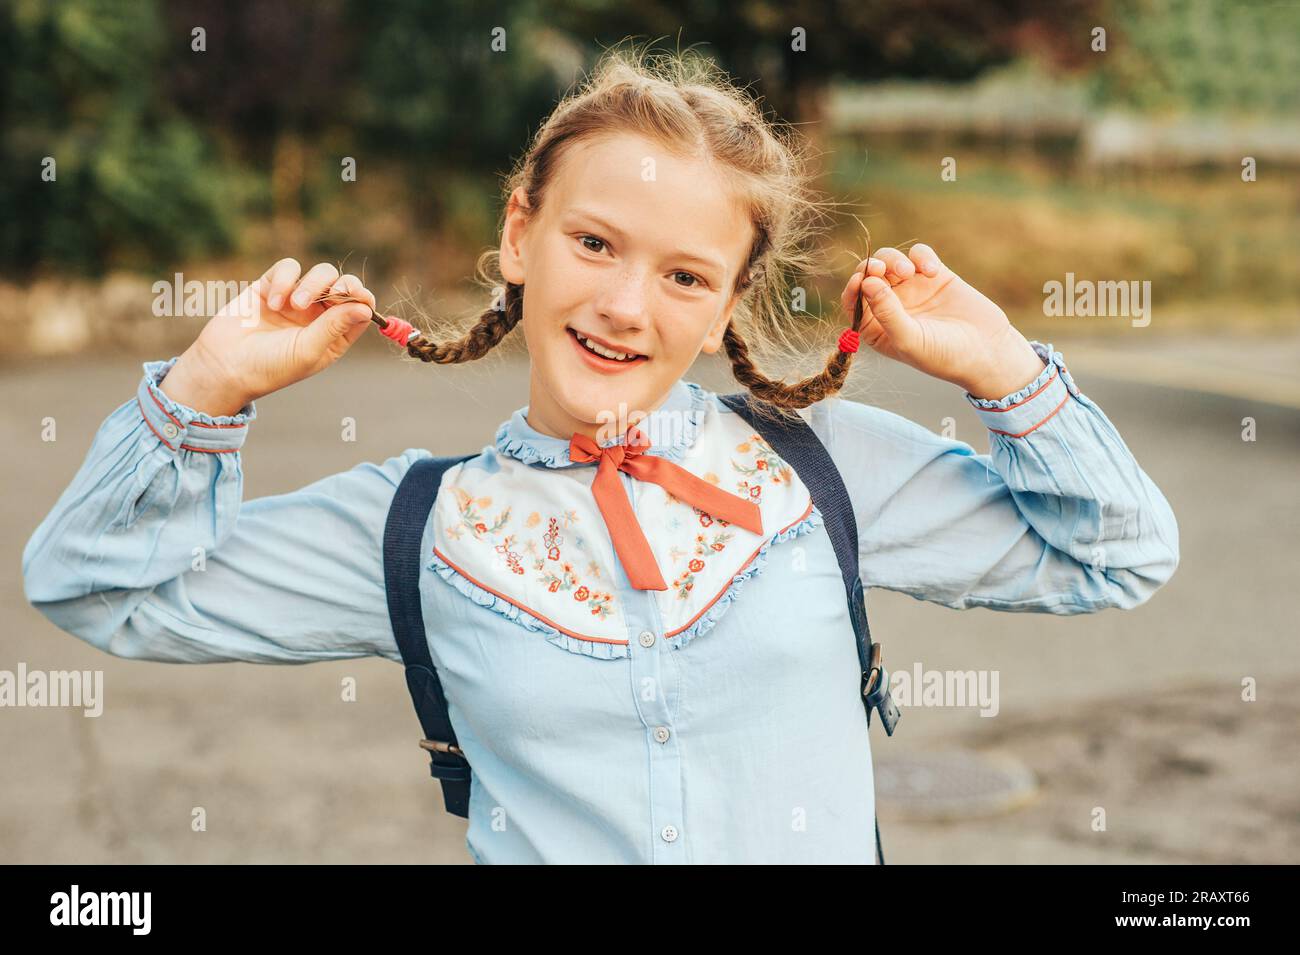 Joyful little schoolgirl looking straight at camera, holding pigtais, wearing vintage uniform and backpack Stock Photo